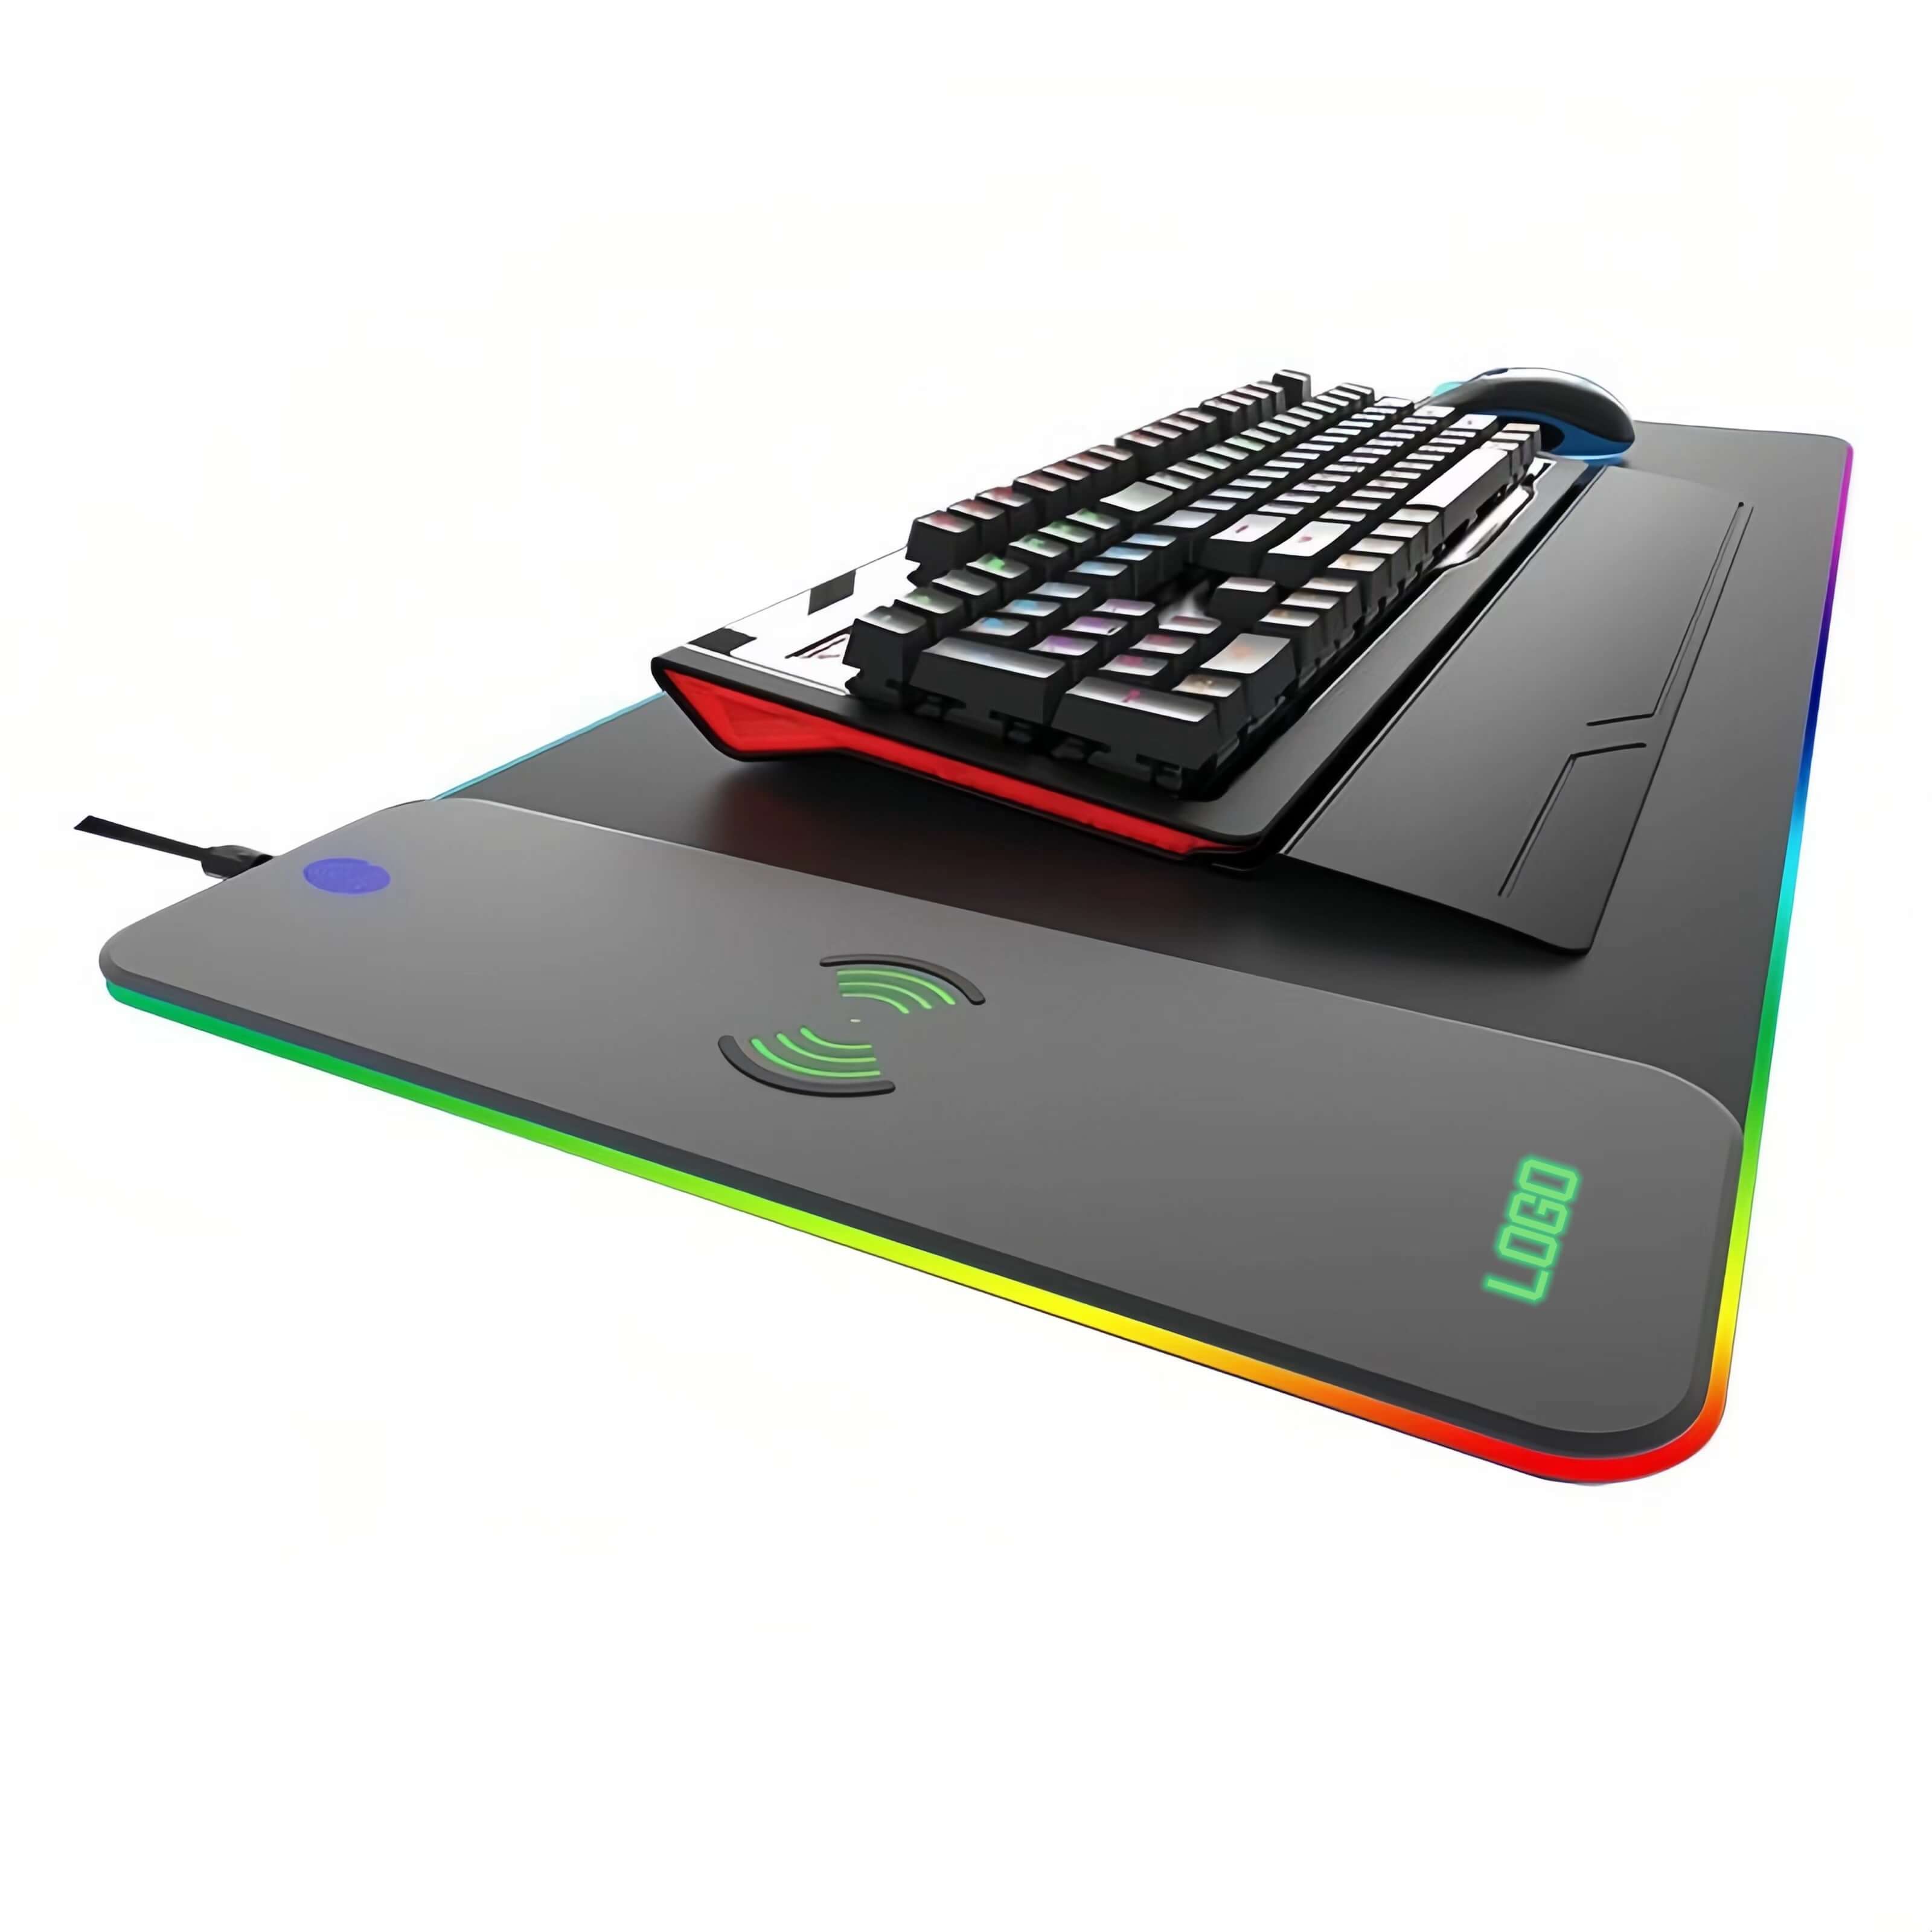 mouse pad with wireless charge.jpg